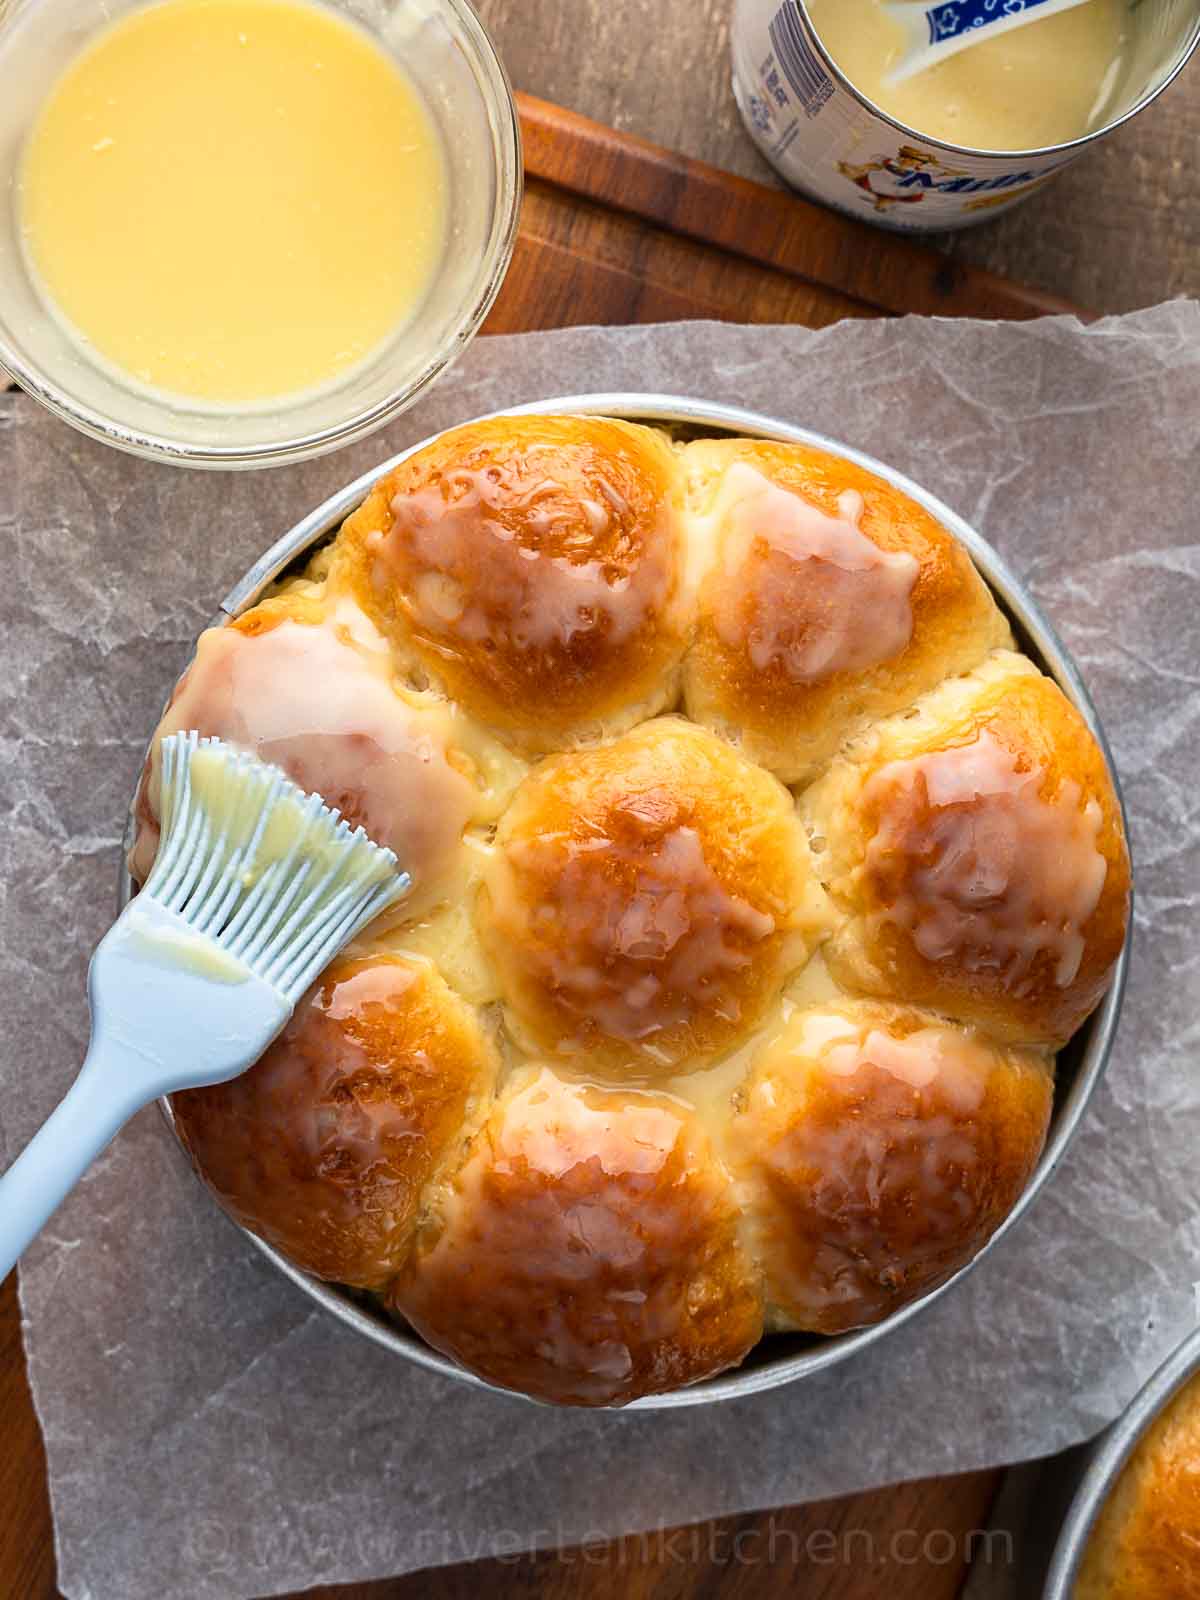 Japanese style soft milk bread glazed with butter and condensed milk.